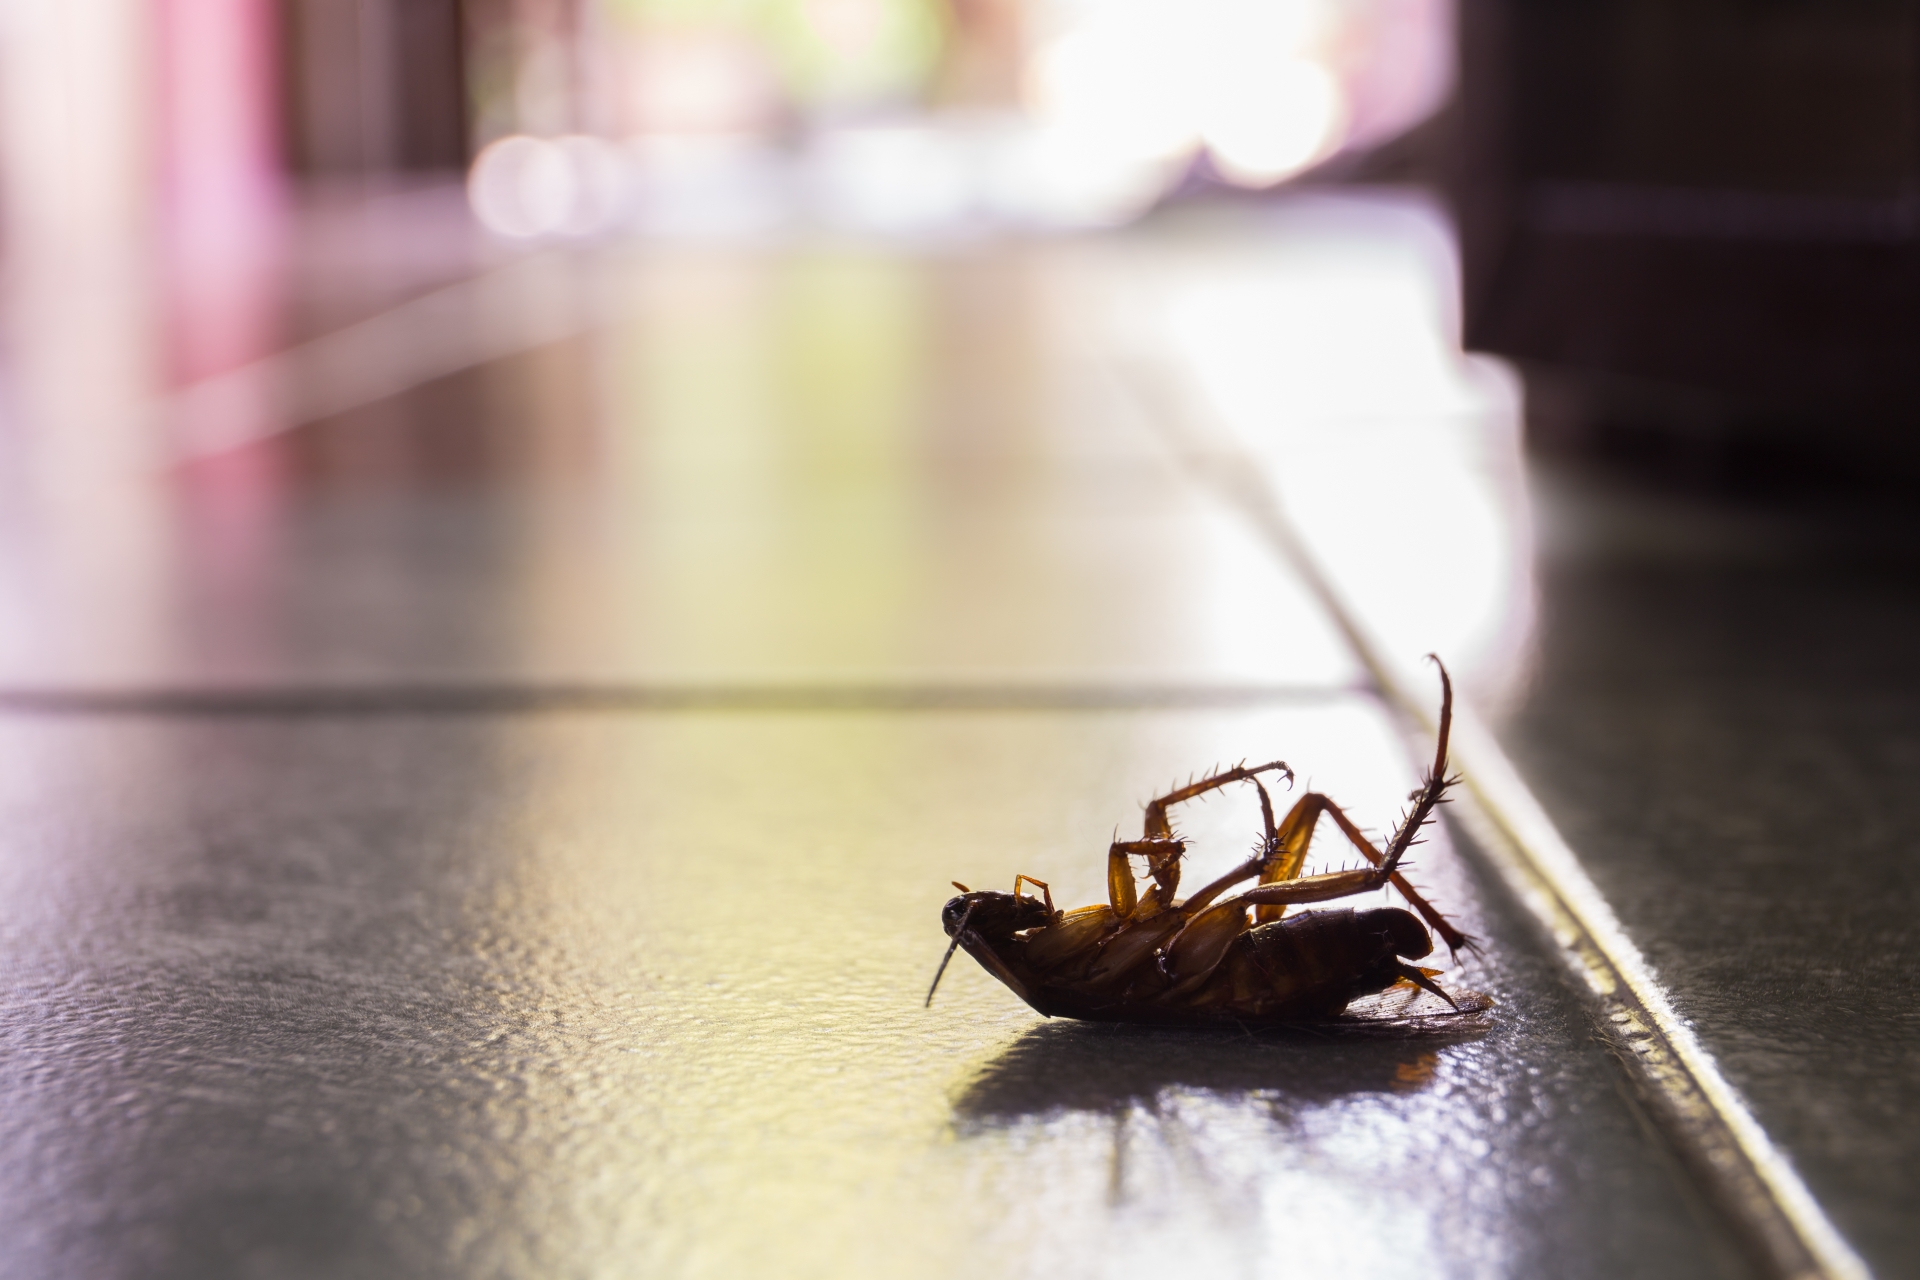 Cockroach Control, Pest Control in Sidcup, DA15. Call Now 020 8166 9746